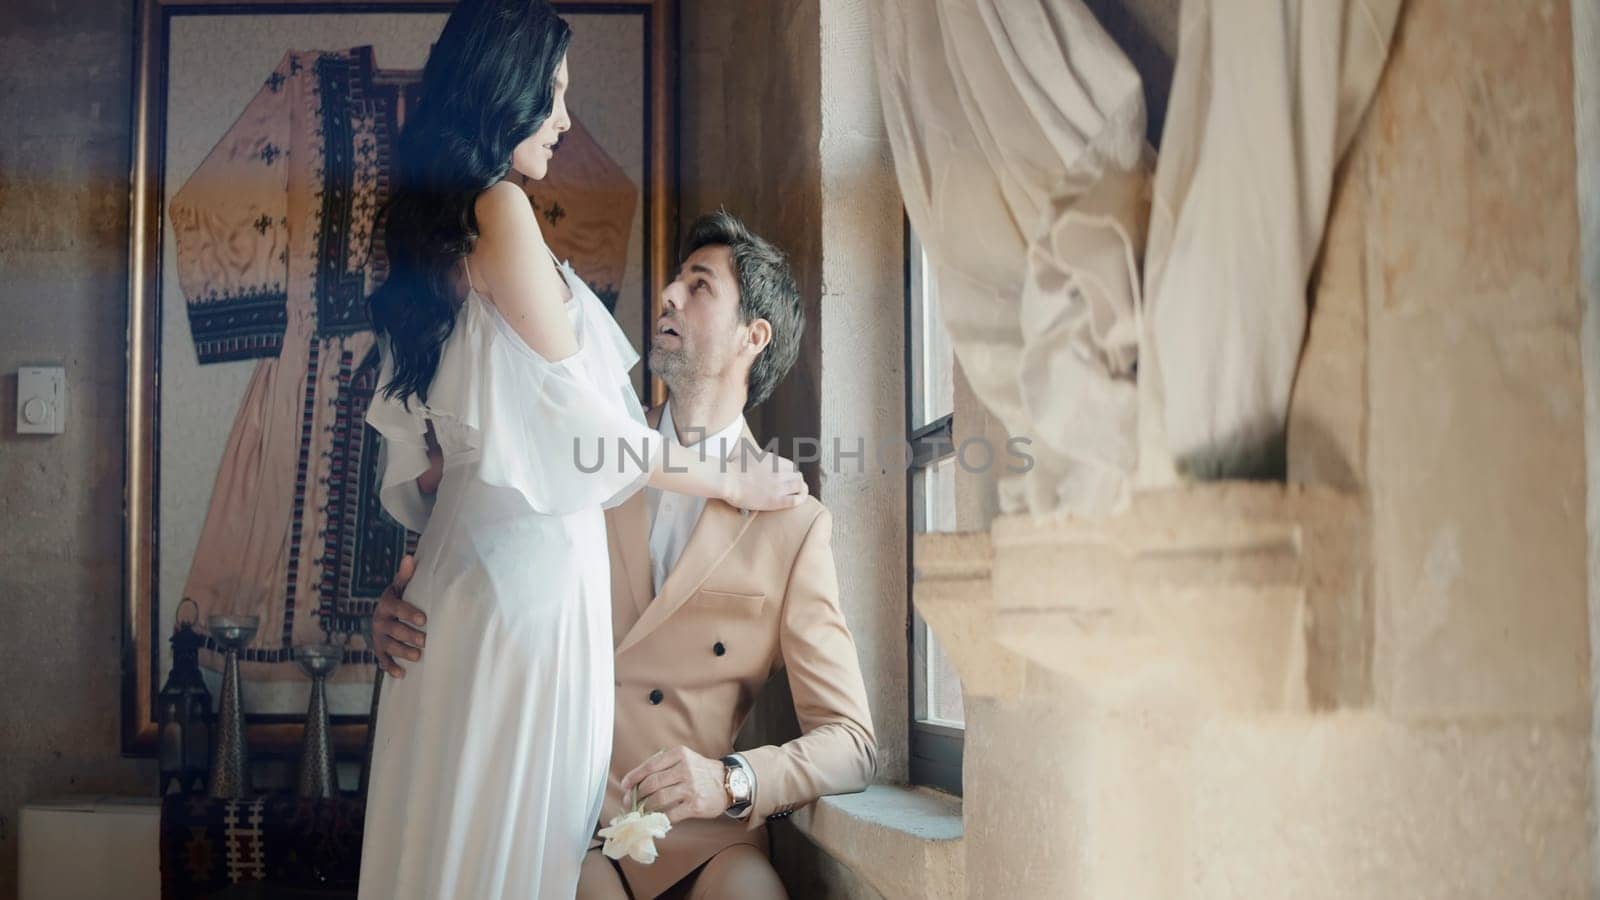 Beautiful fashionable studio shooting . Action . A beautiful young couple in wedding costumes, a bride in a magnificent dress, who are sitting on the floor in a stone room with various decorations on the walls and lighting from below. High quality 4k footage